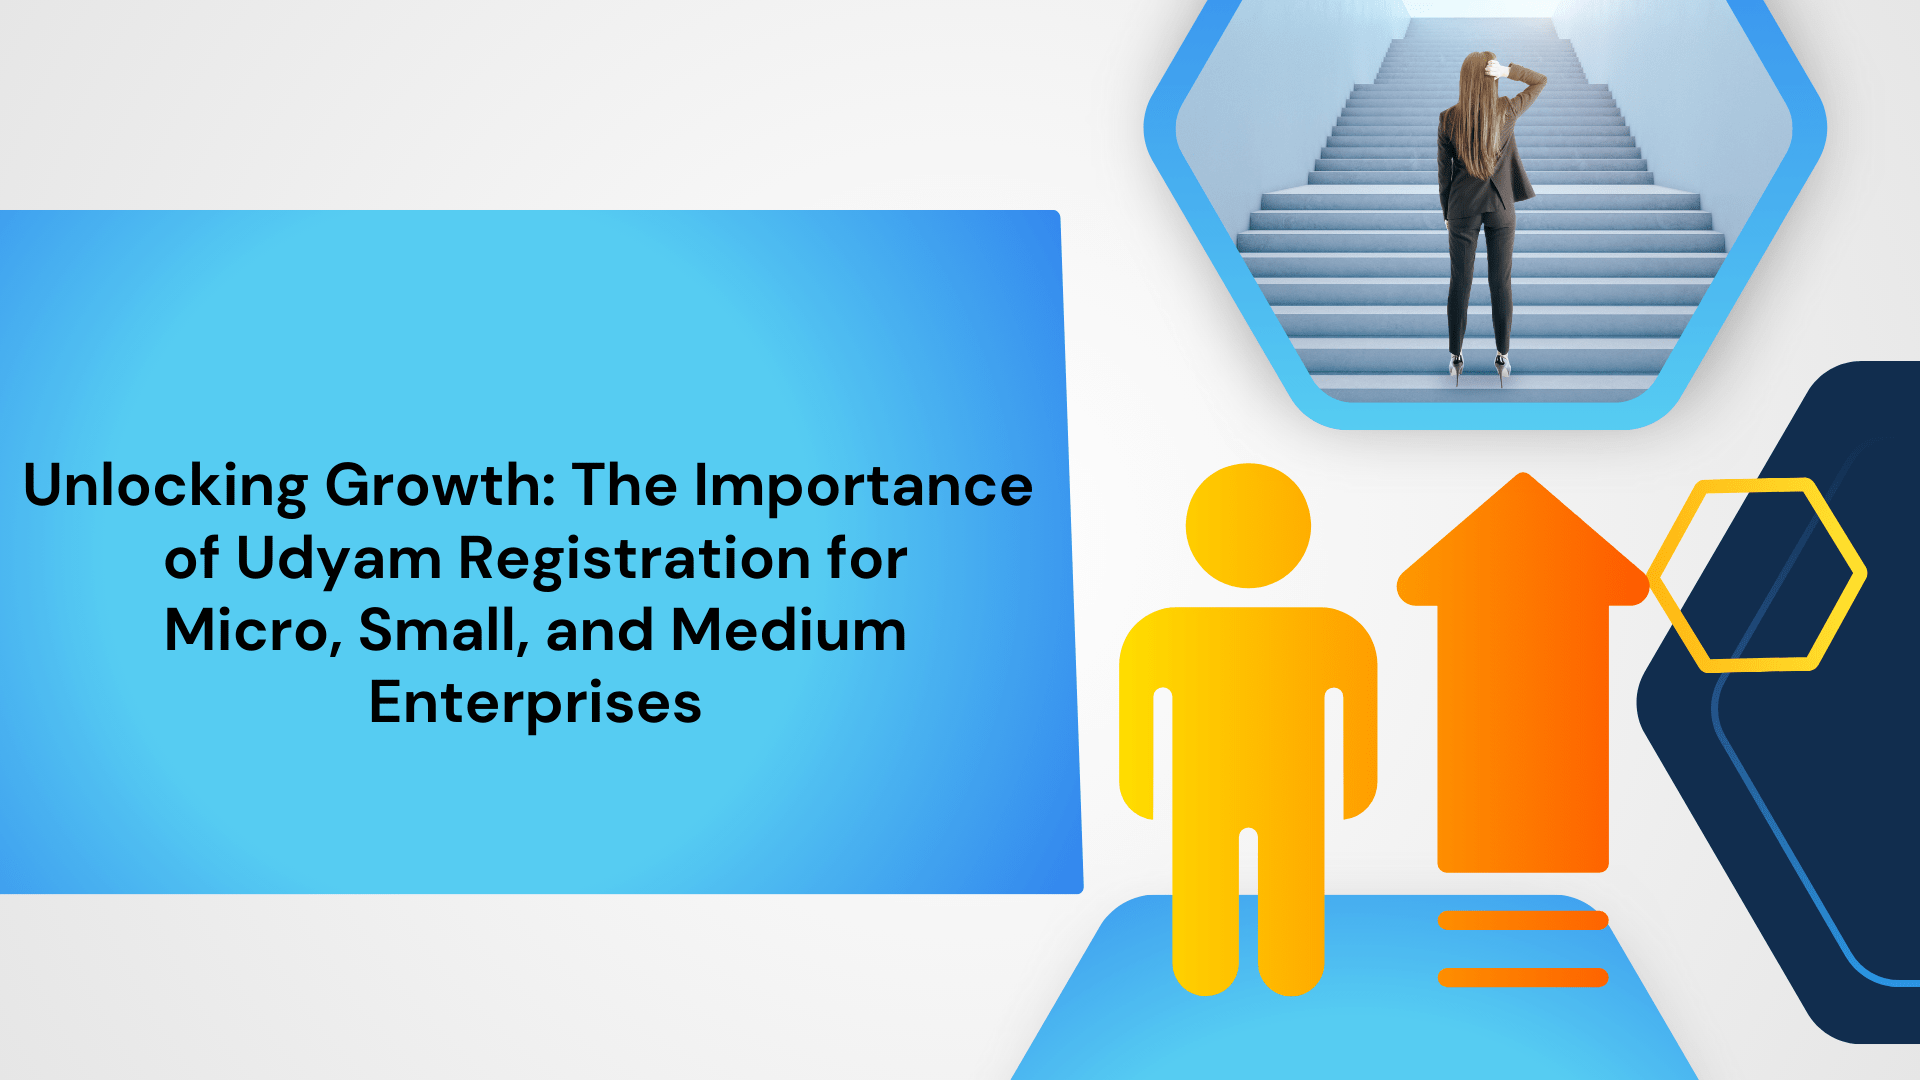 Unlocking Growth: The Importance of Udyam Registration for Micro, Small, and Medium Enterprises